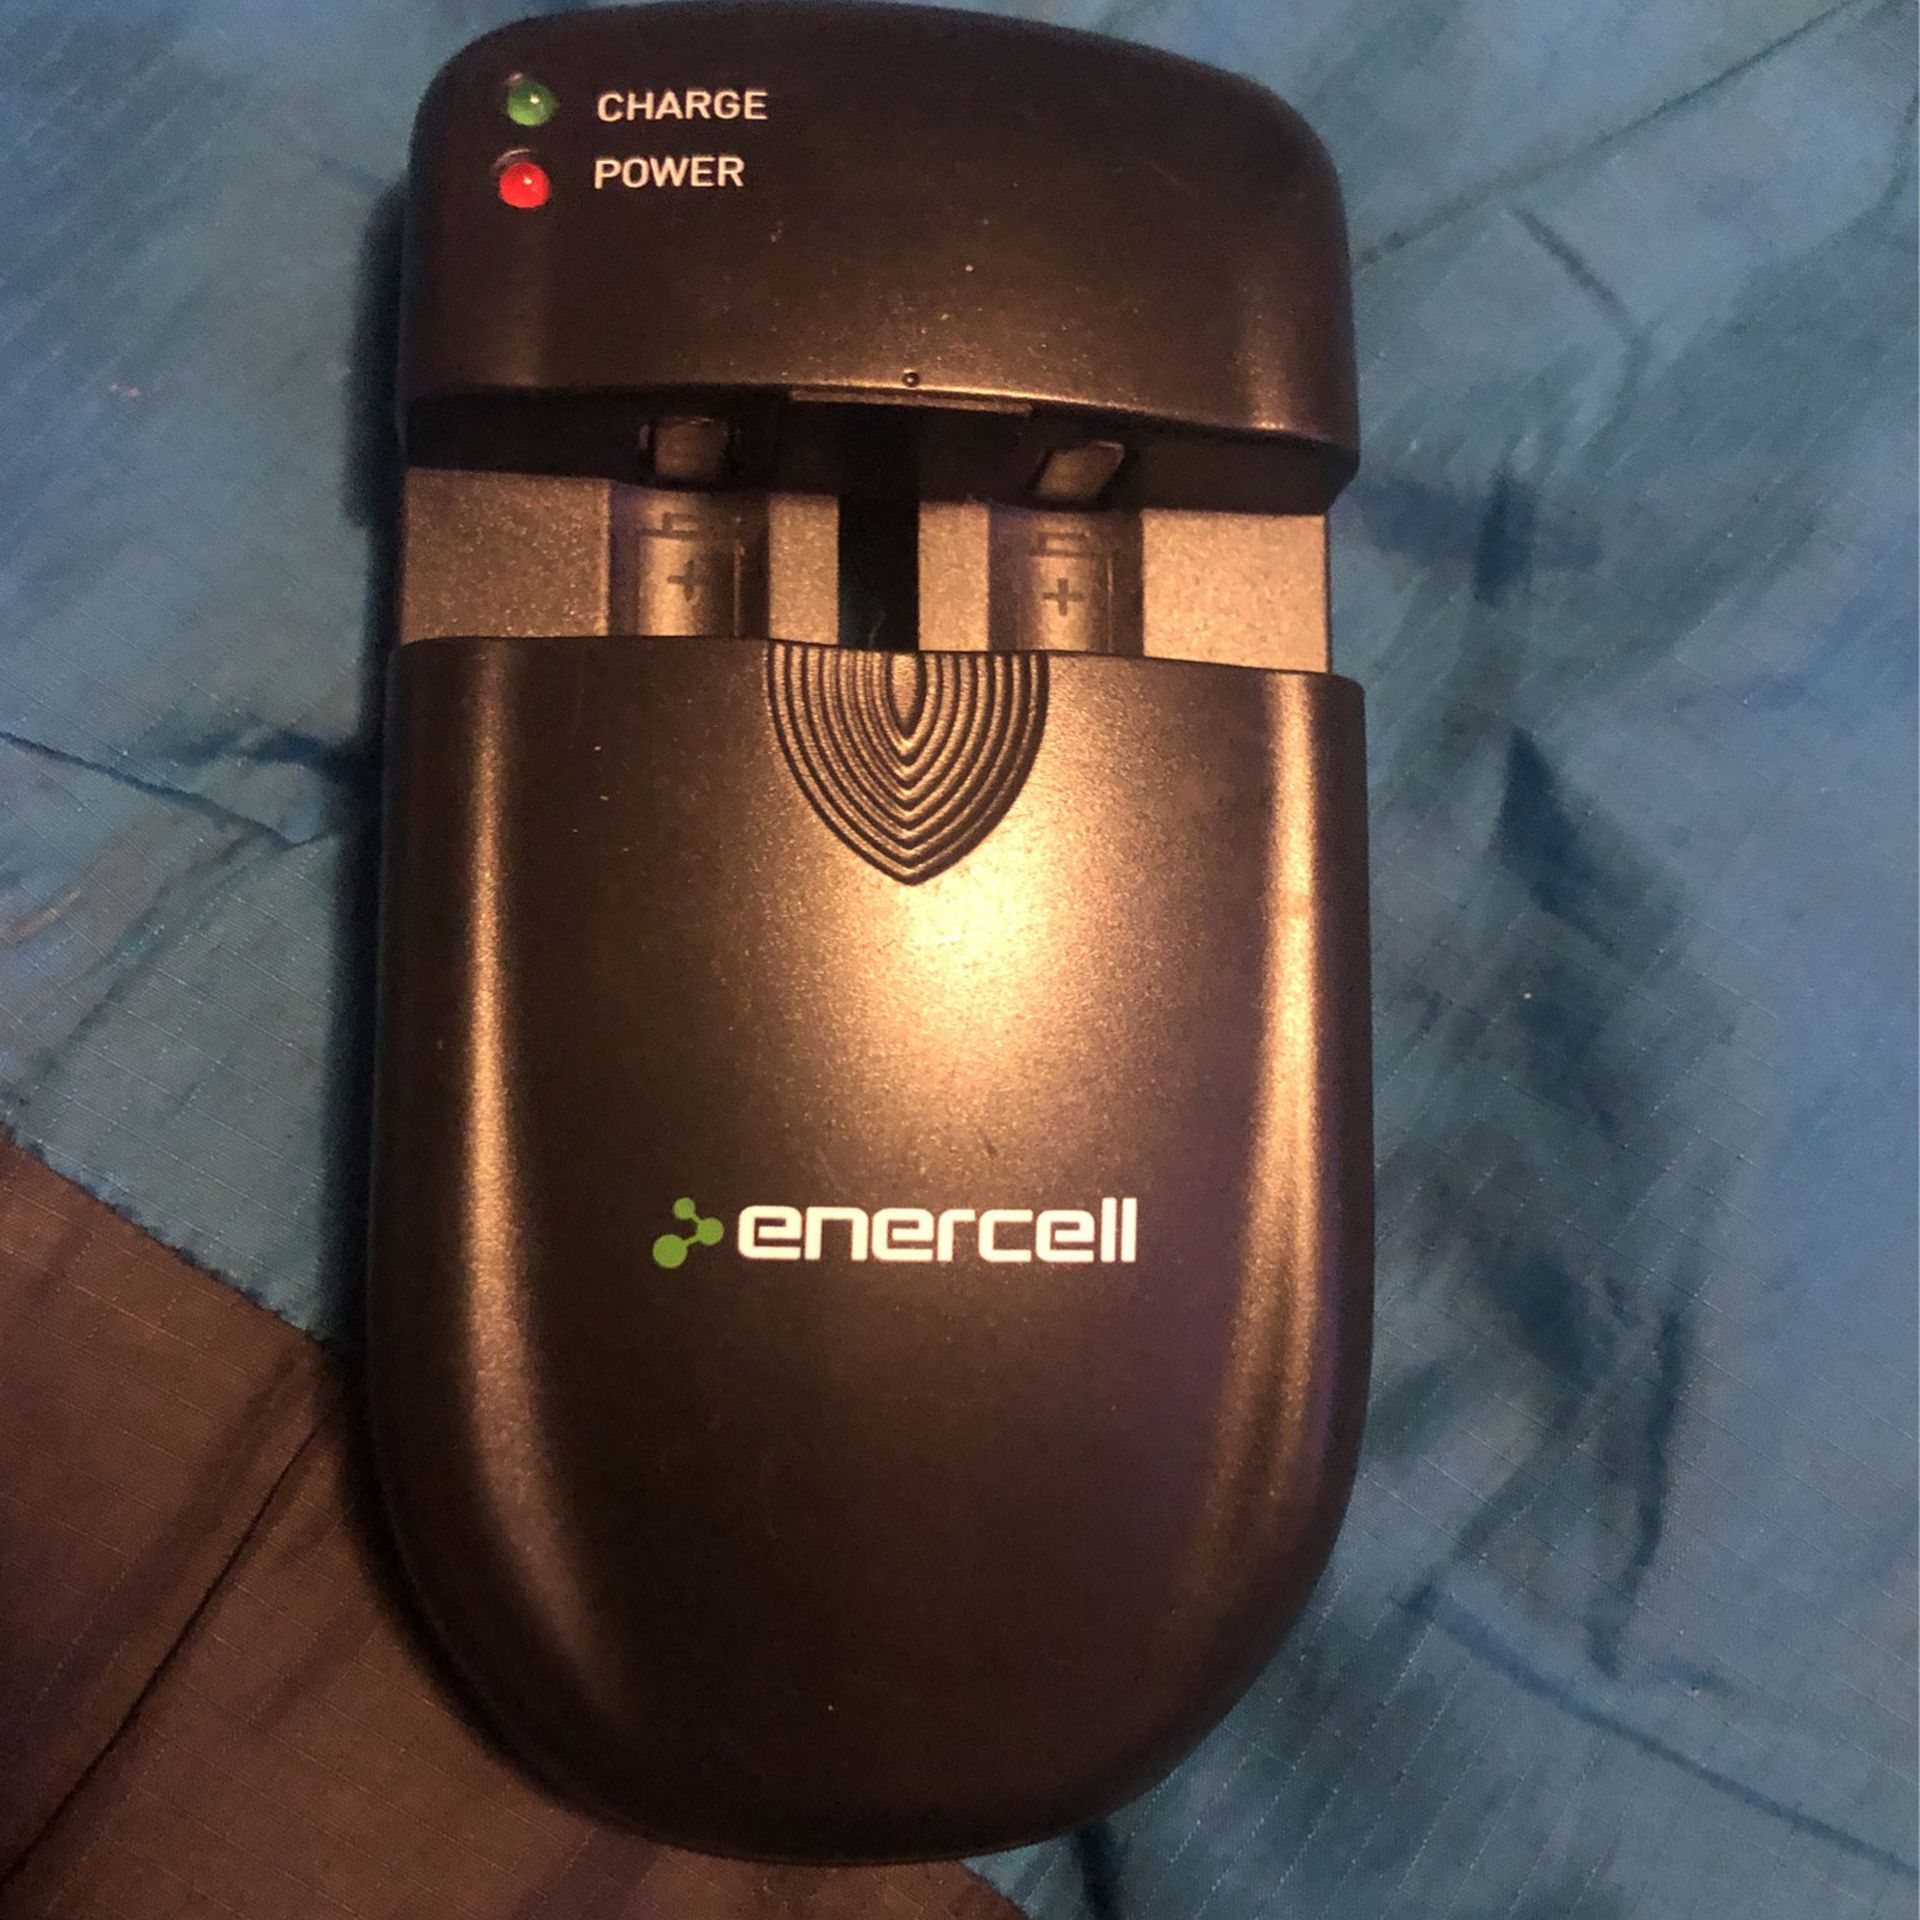 enercell universal charger